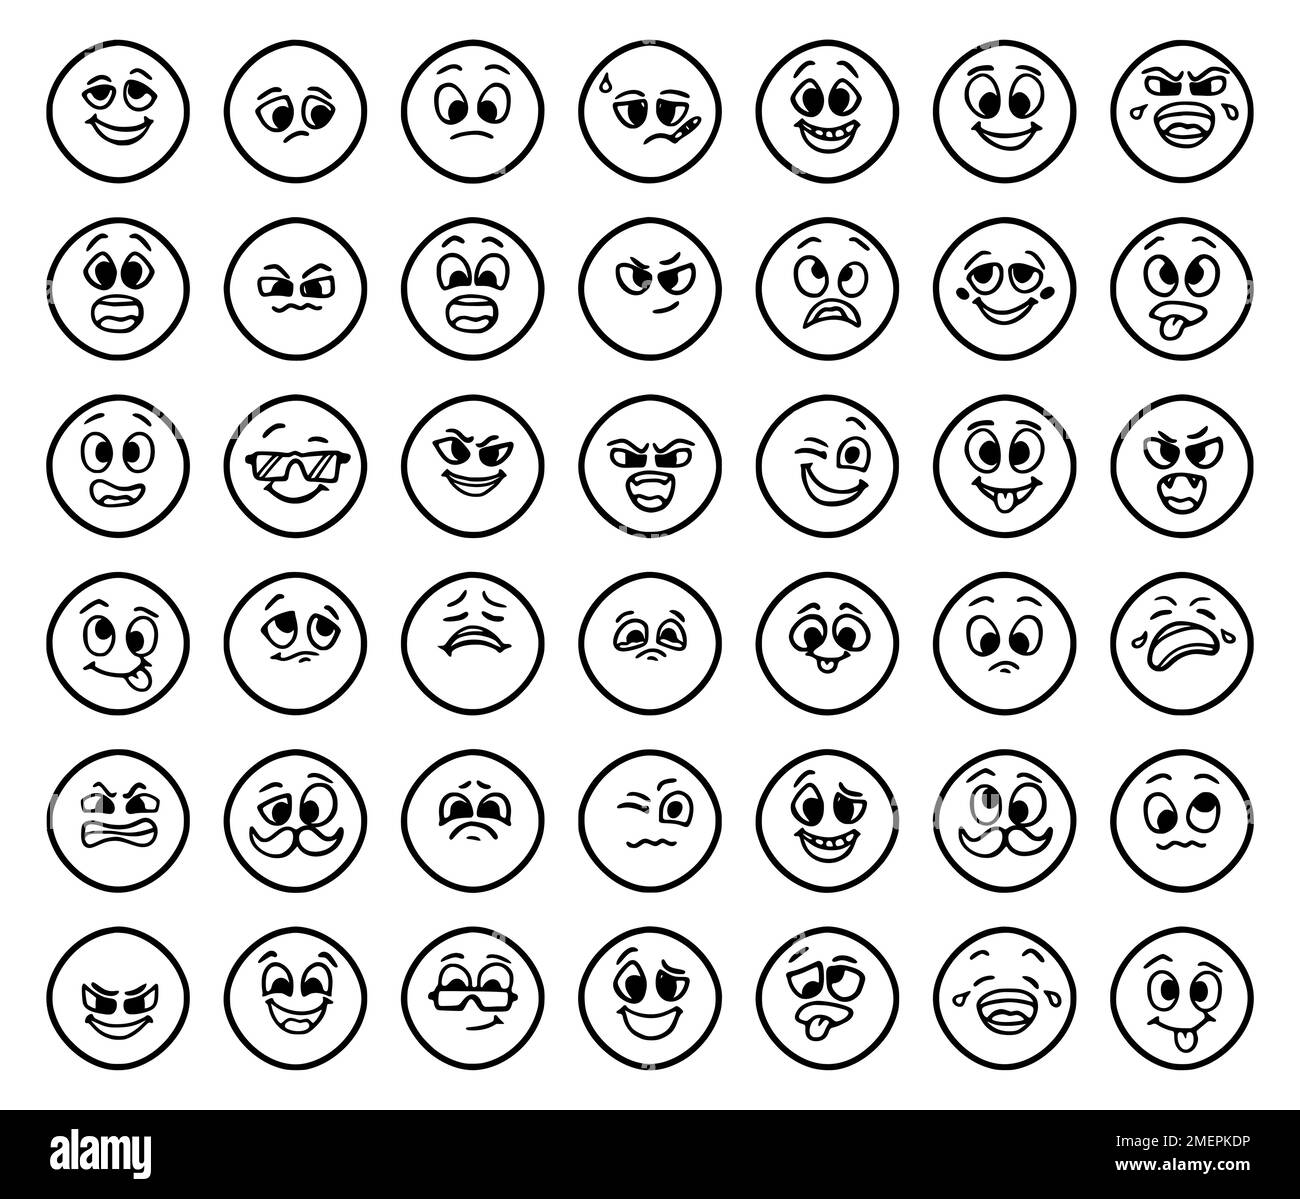 Set of emoticons showing different emotions in doodle style isolated on white background. Funny faces hand drawn clip art. Stock Vector